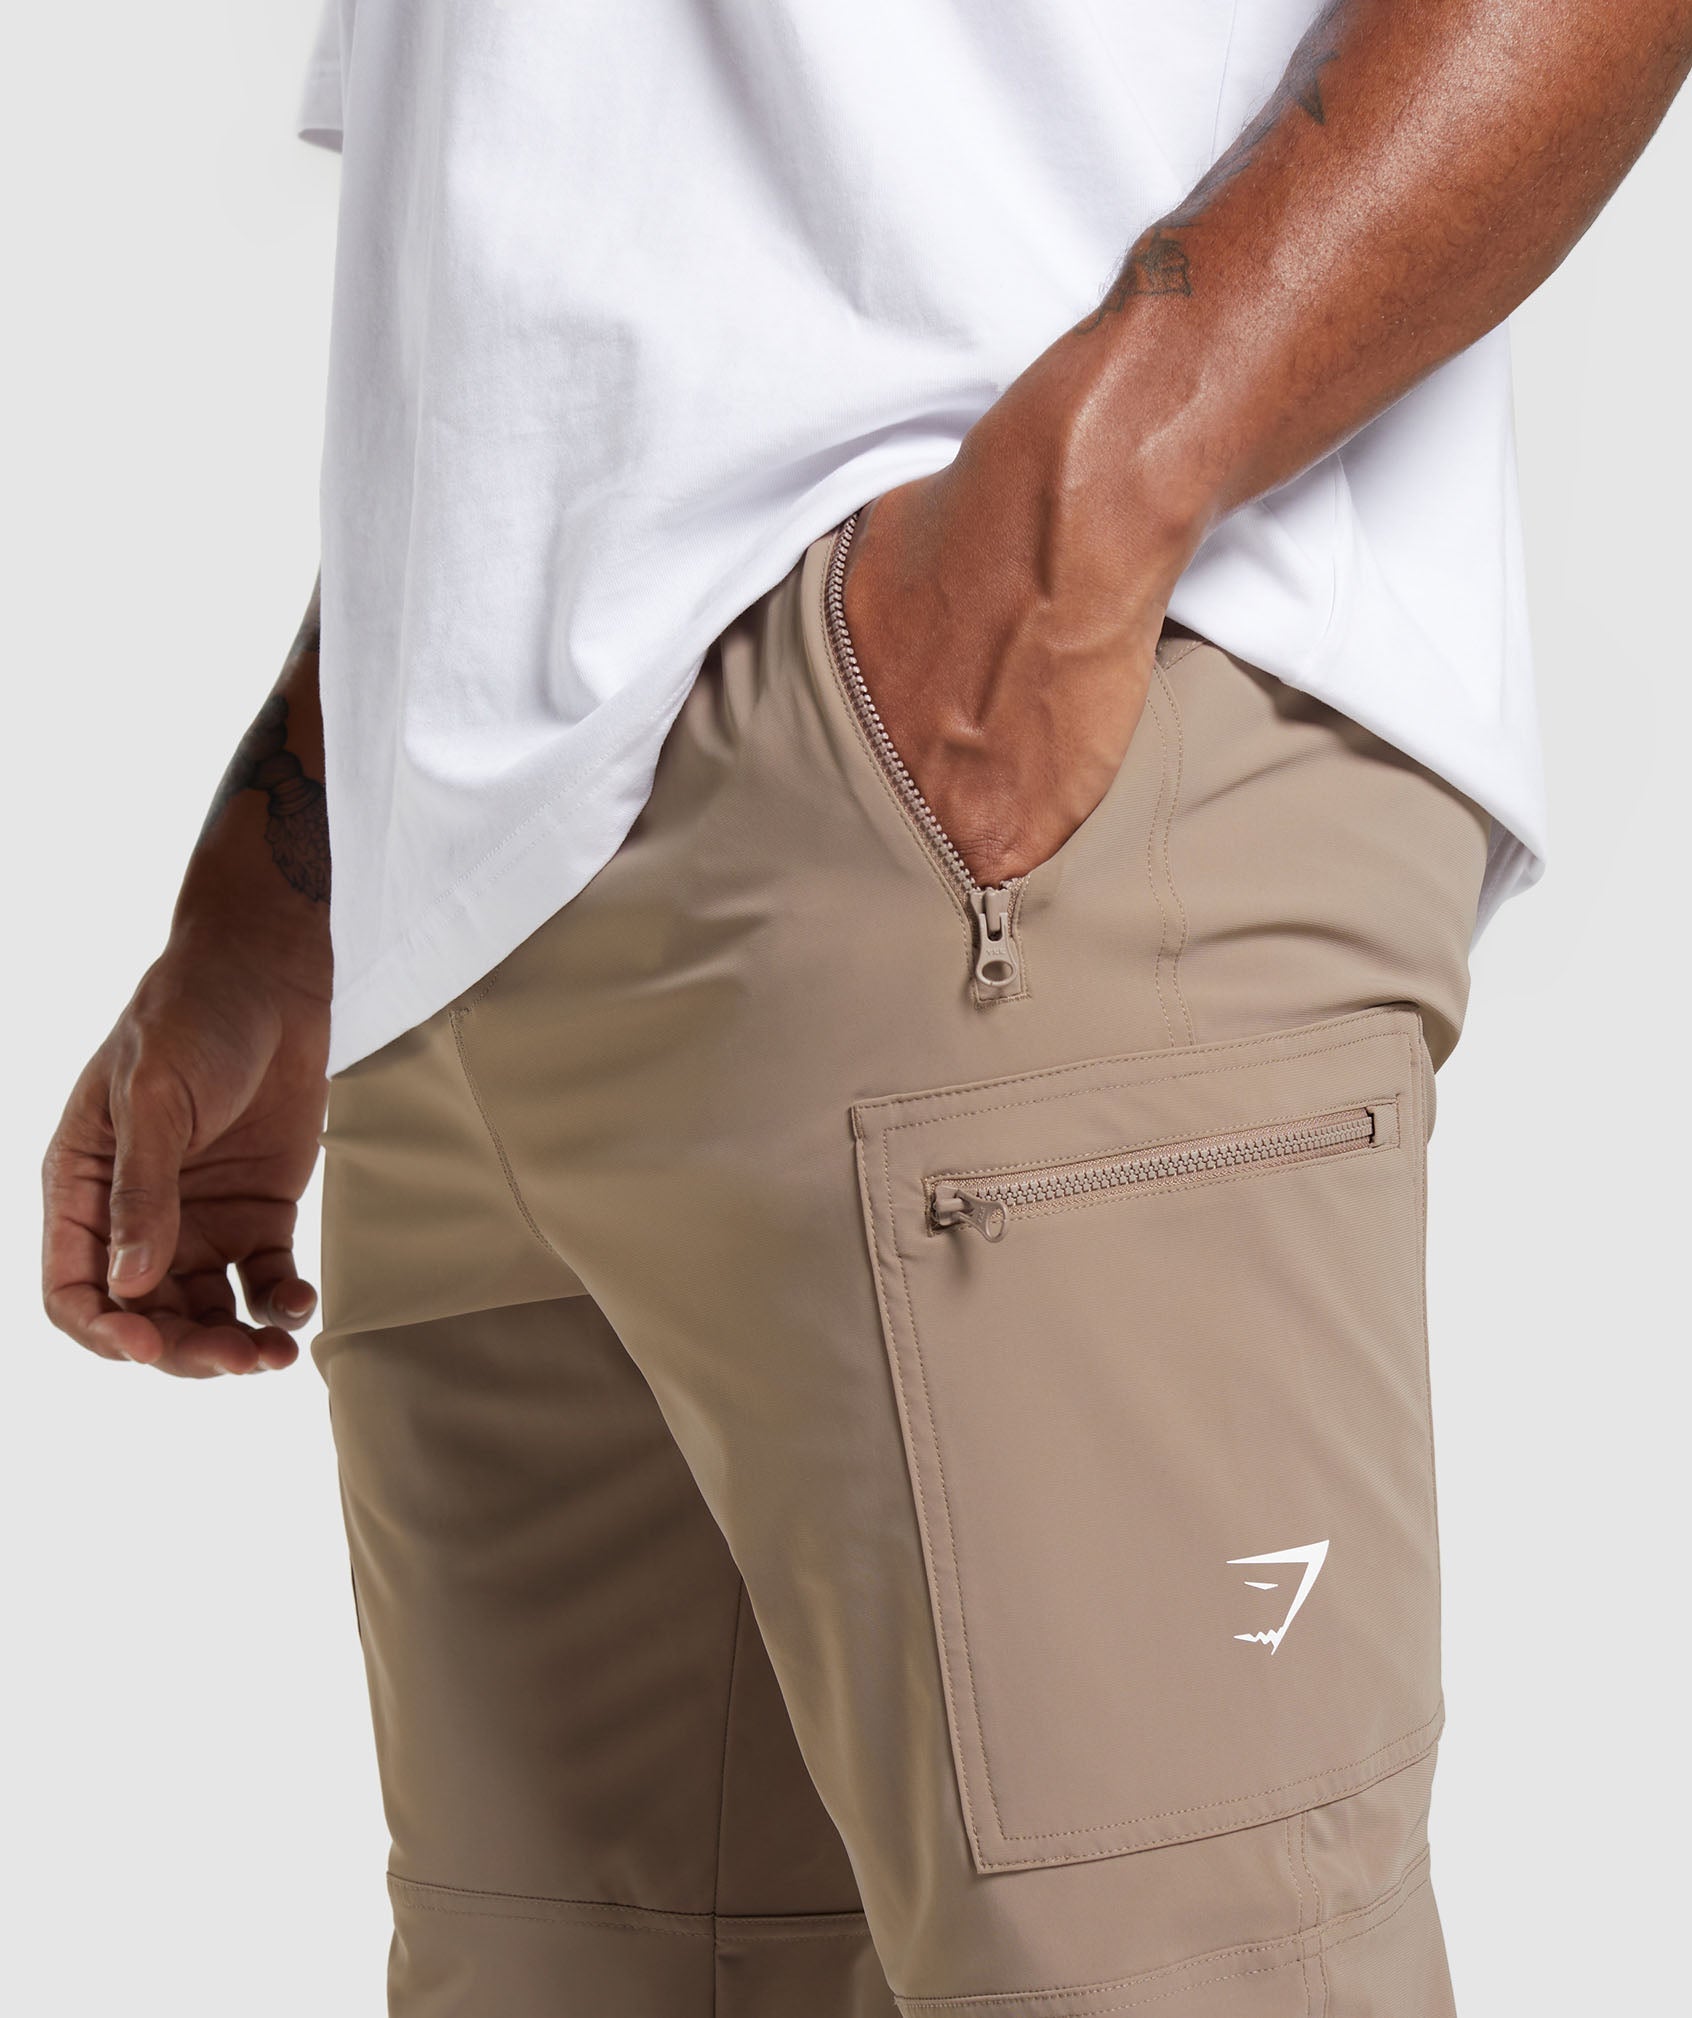 Rest Day Cargo Pants in Mocha Mauve - view 5